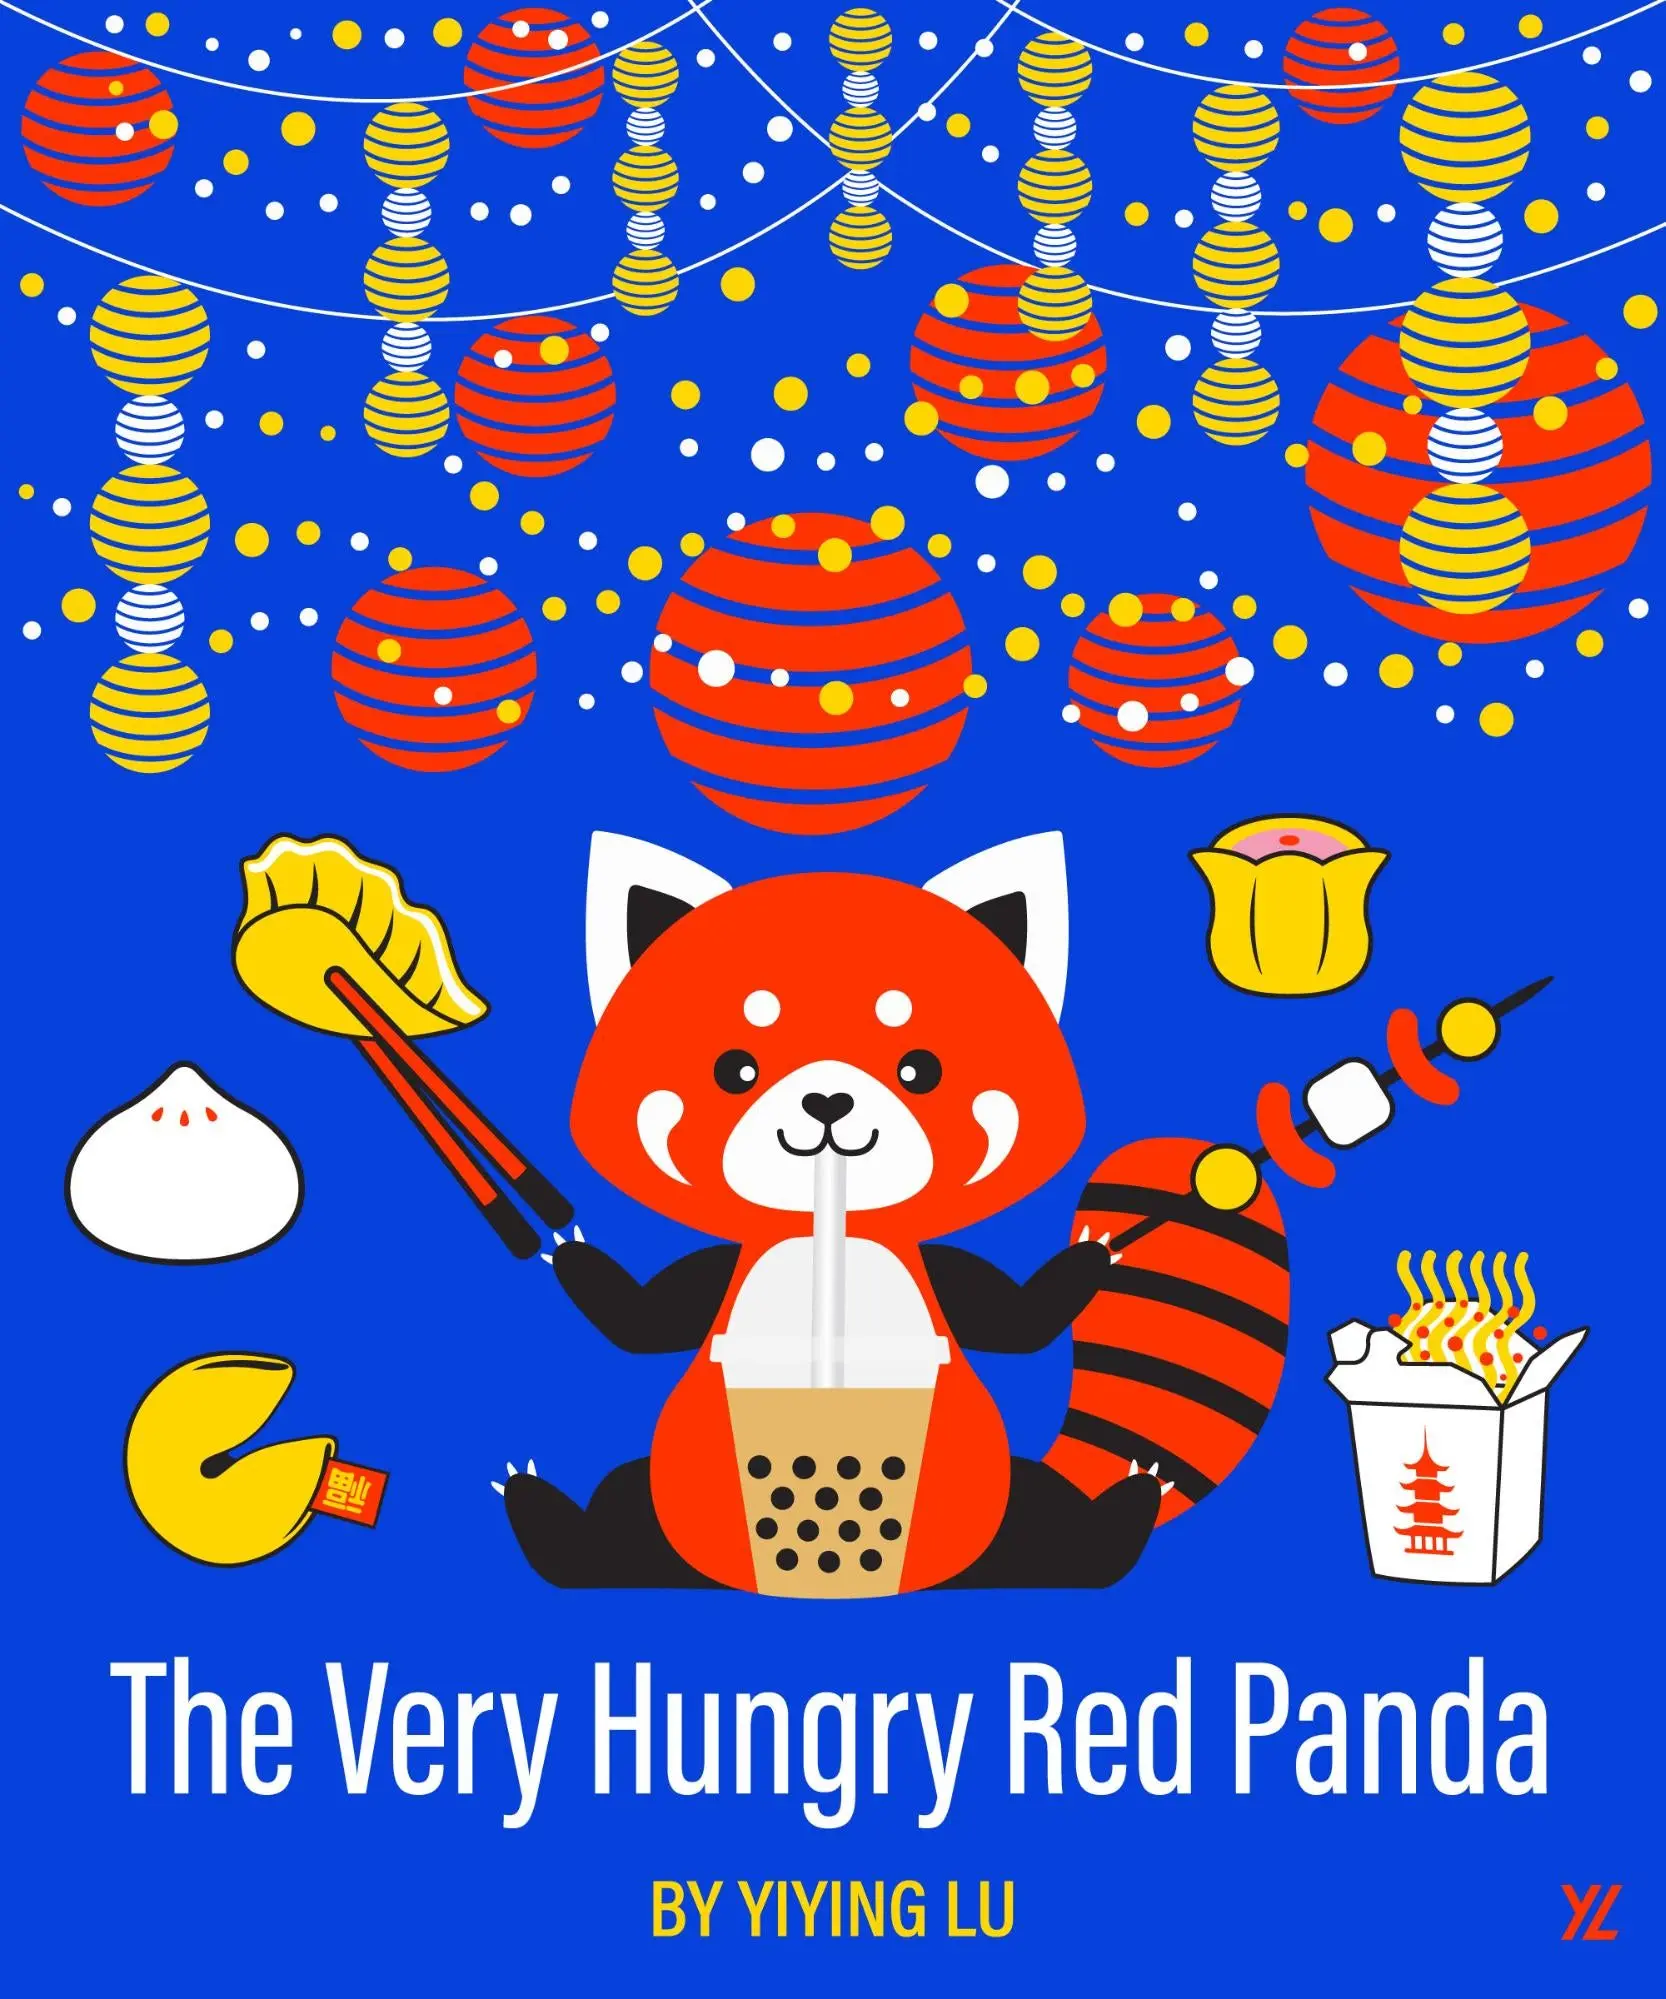 Cover for The Very Hungry Red Panda project, by Yiying Lu. 